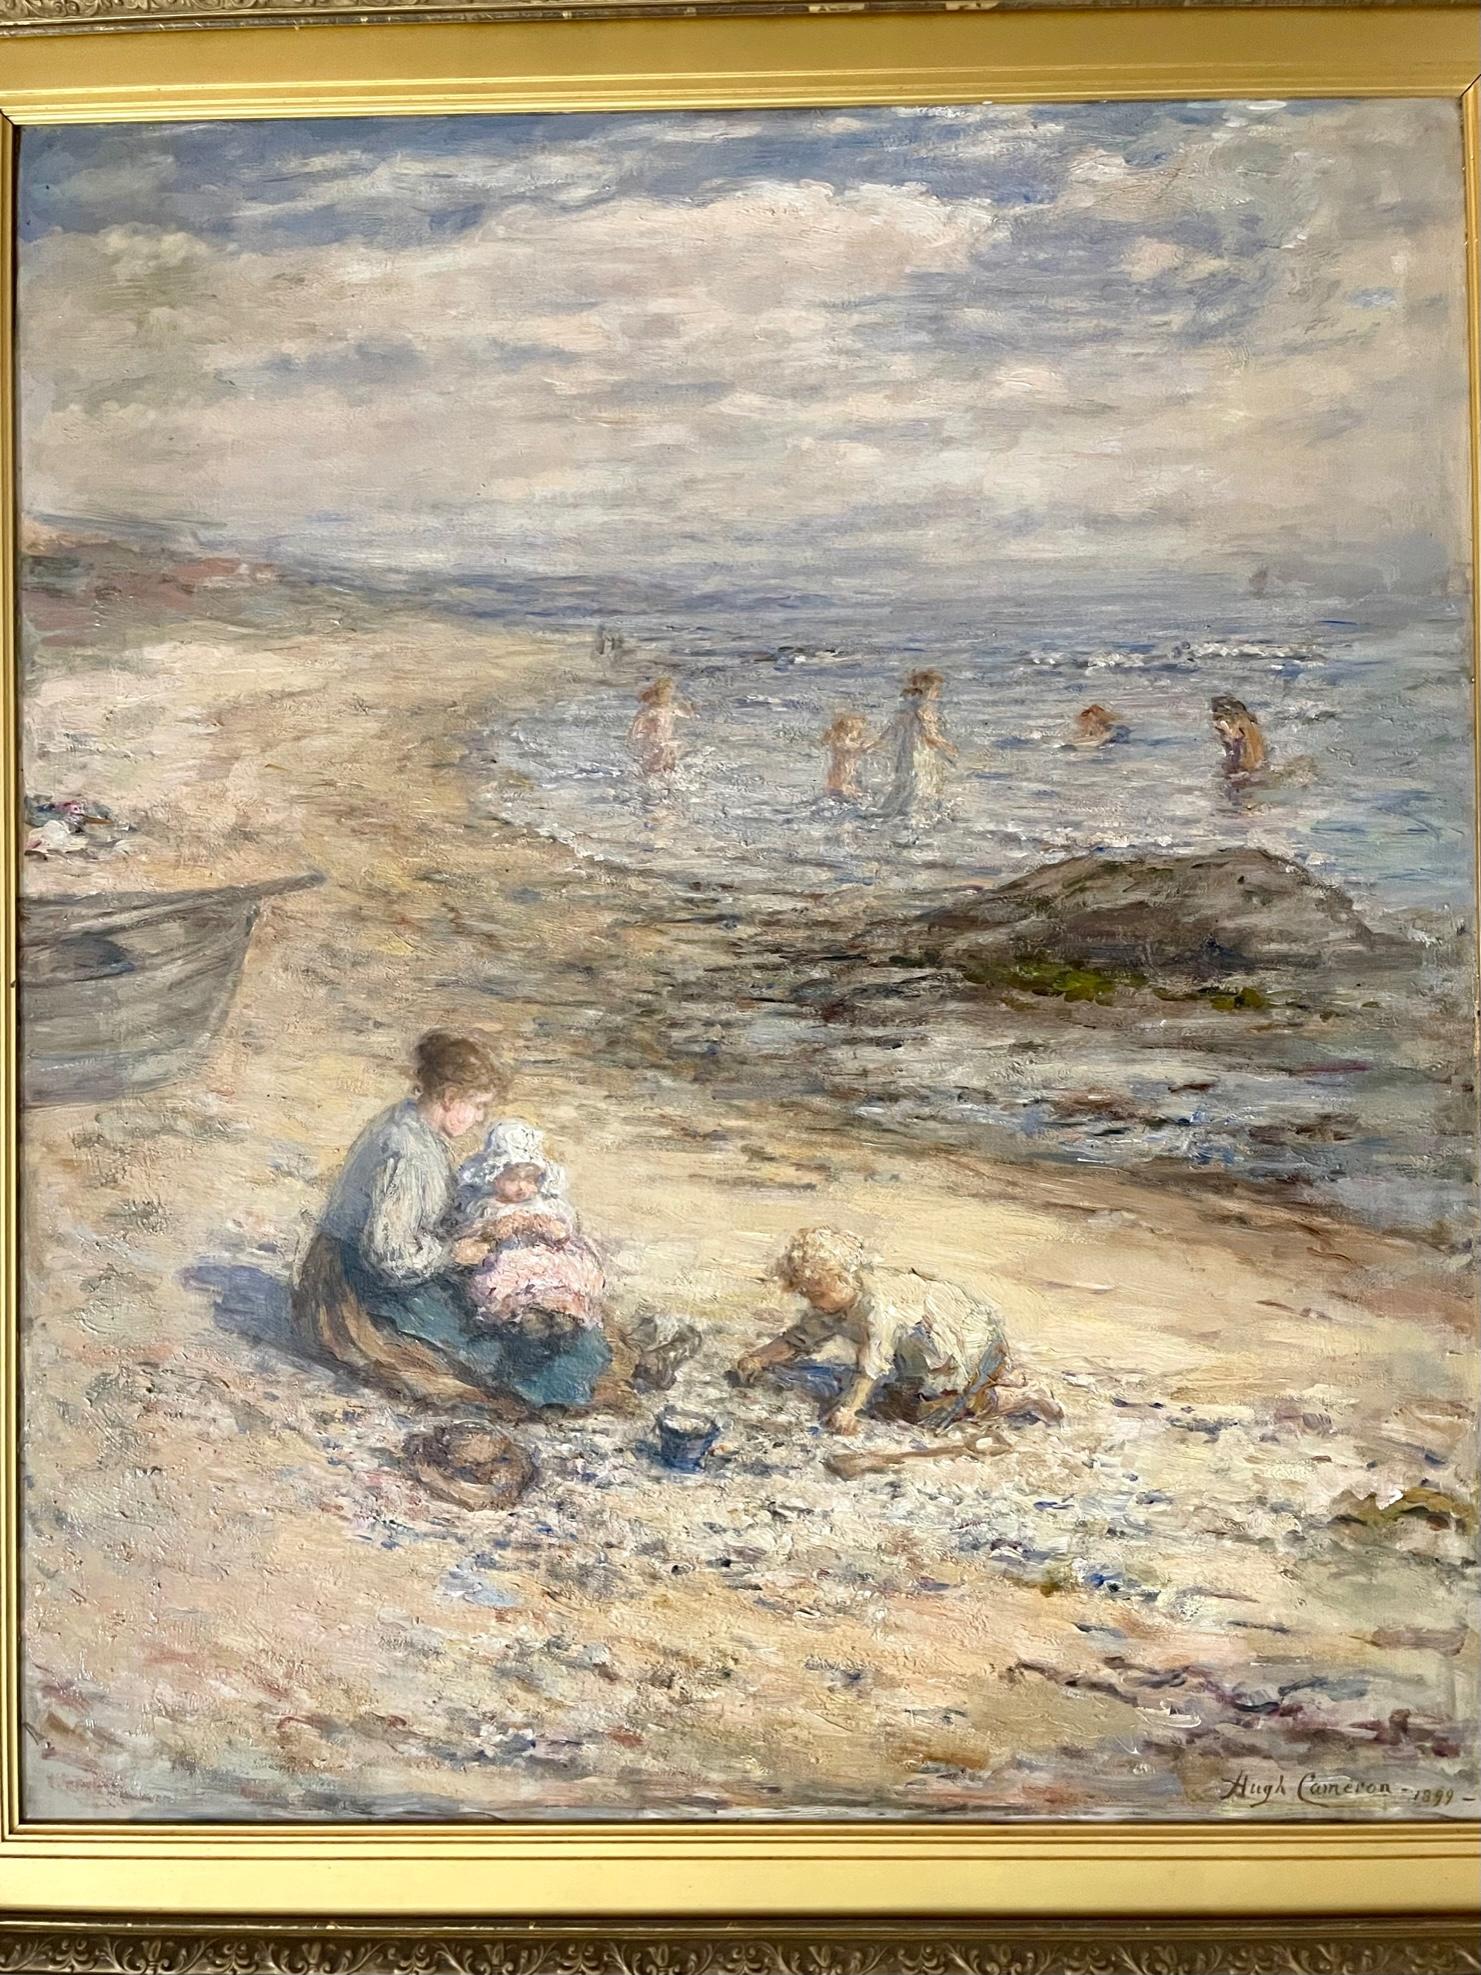 By The Seaside - Painting by Hugh Cameron